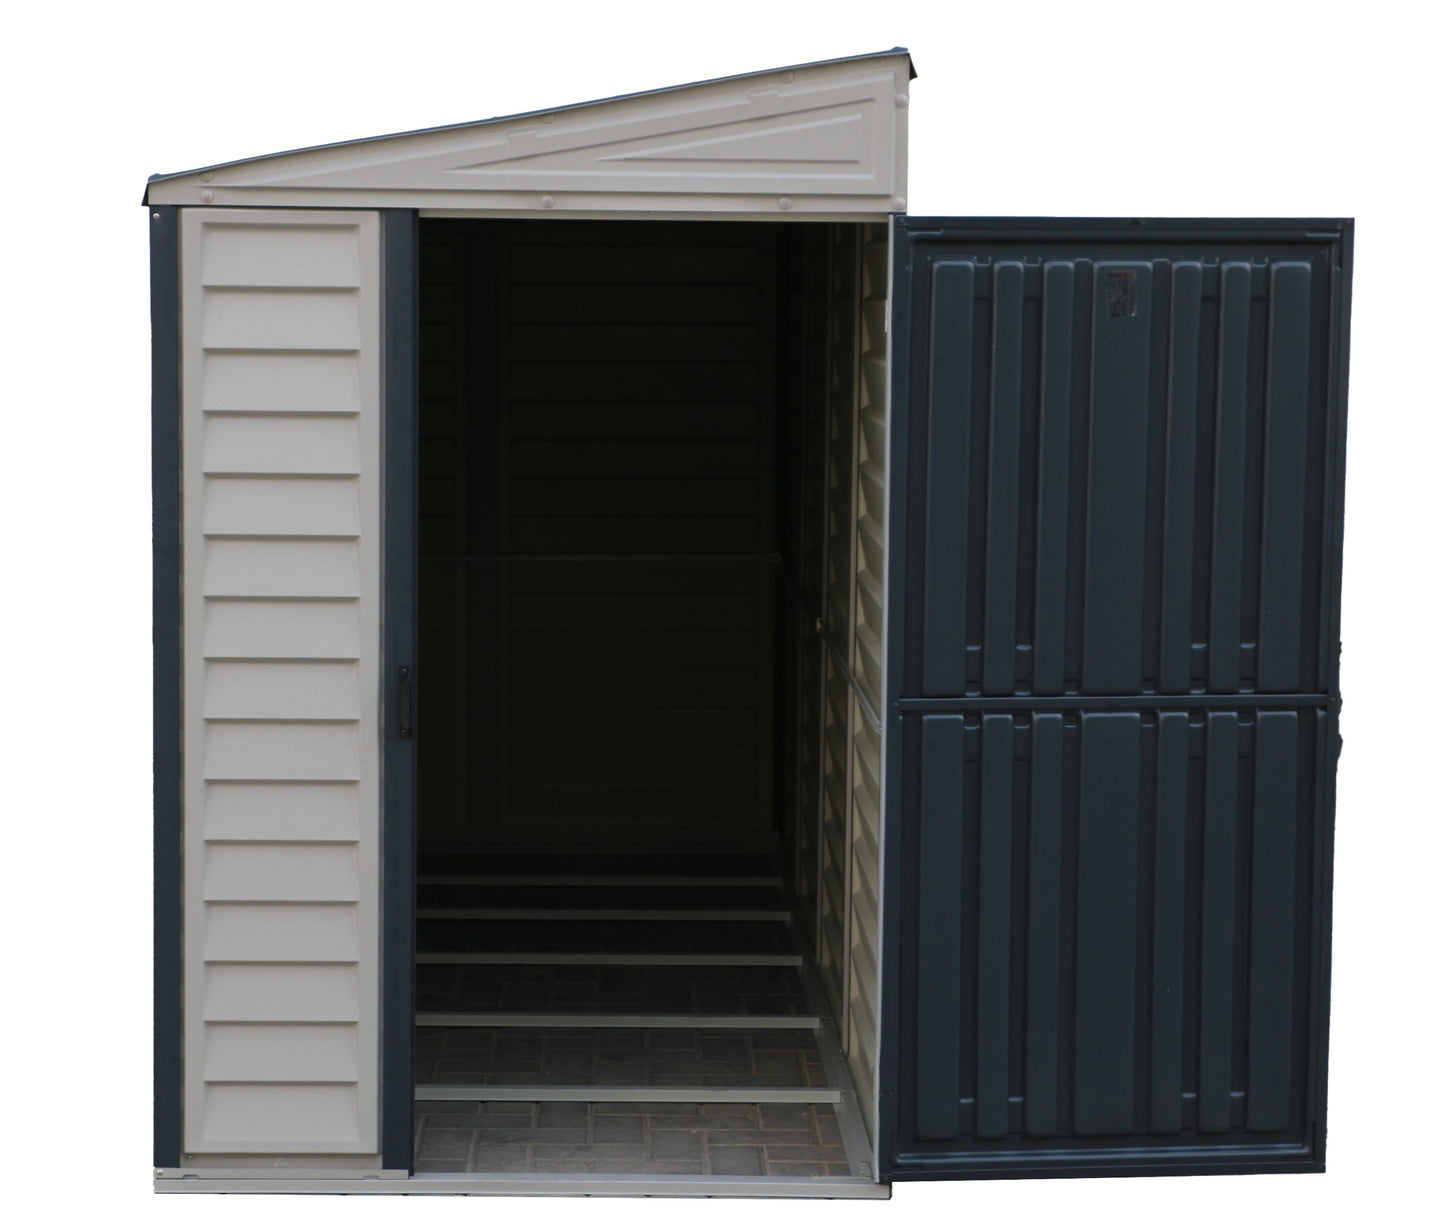 DuraMax Vinyl Shed 4x10 SideMate Plus with Foundation Kit